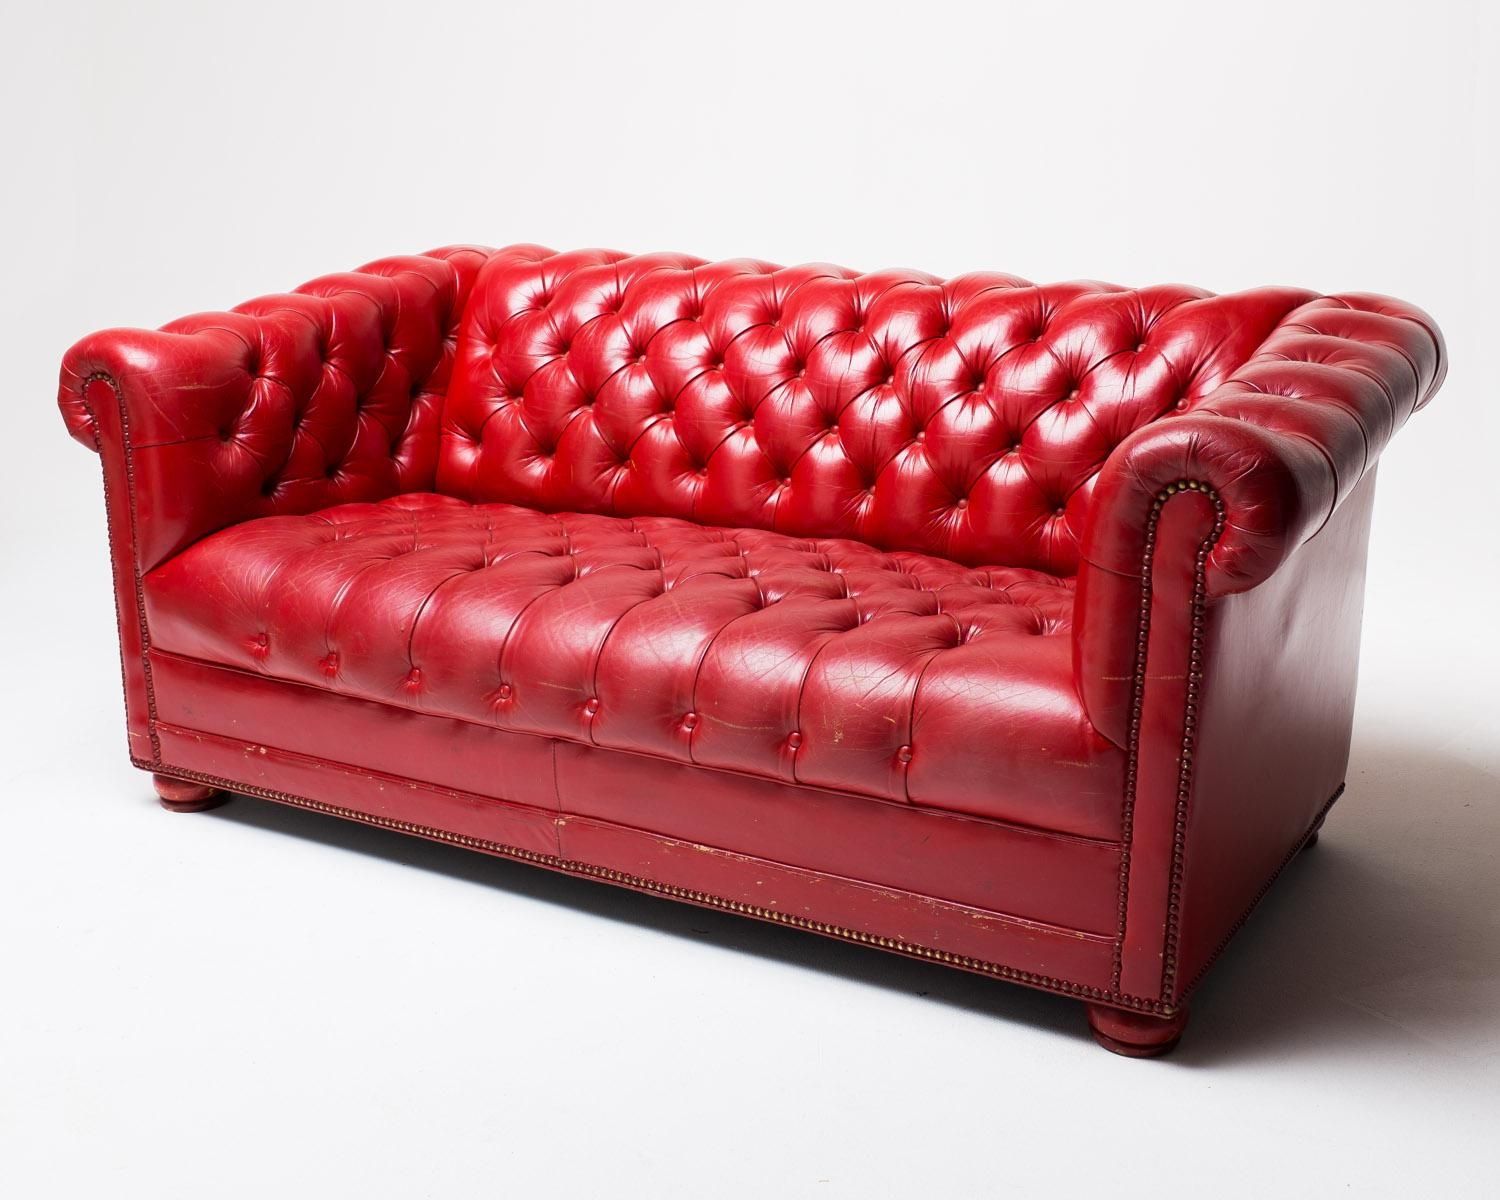 Corner Sofa With Black Leather Base And Red Fabric Seven Seat Regarding Short Sofas (View 7 of 20)